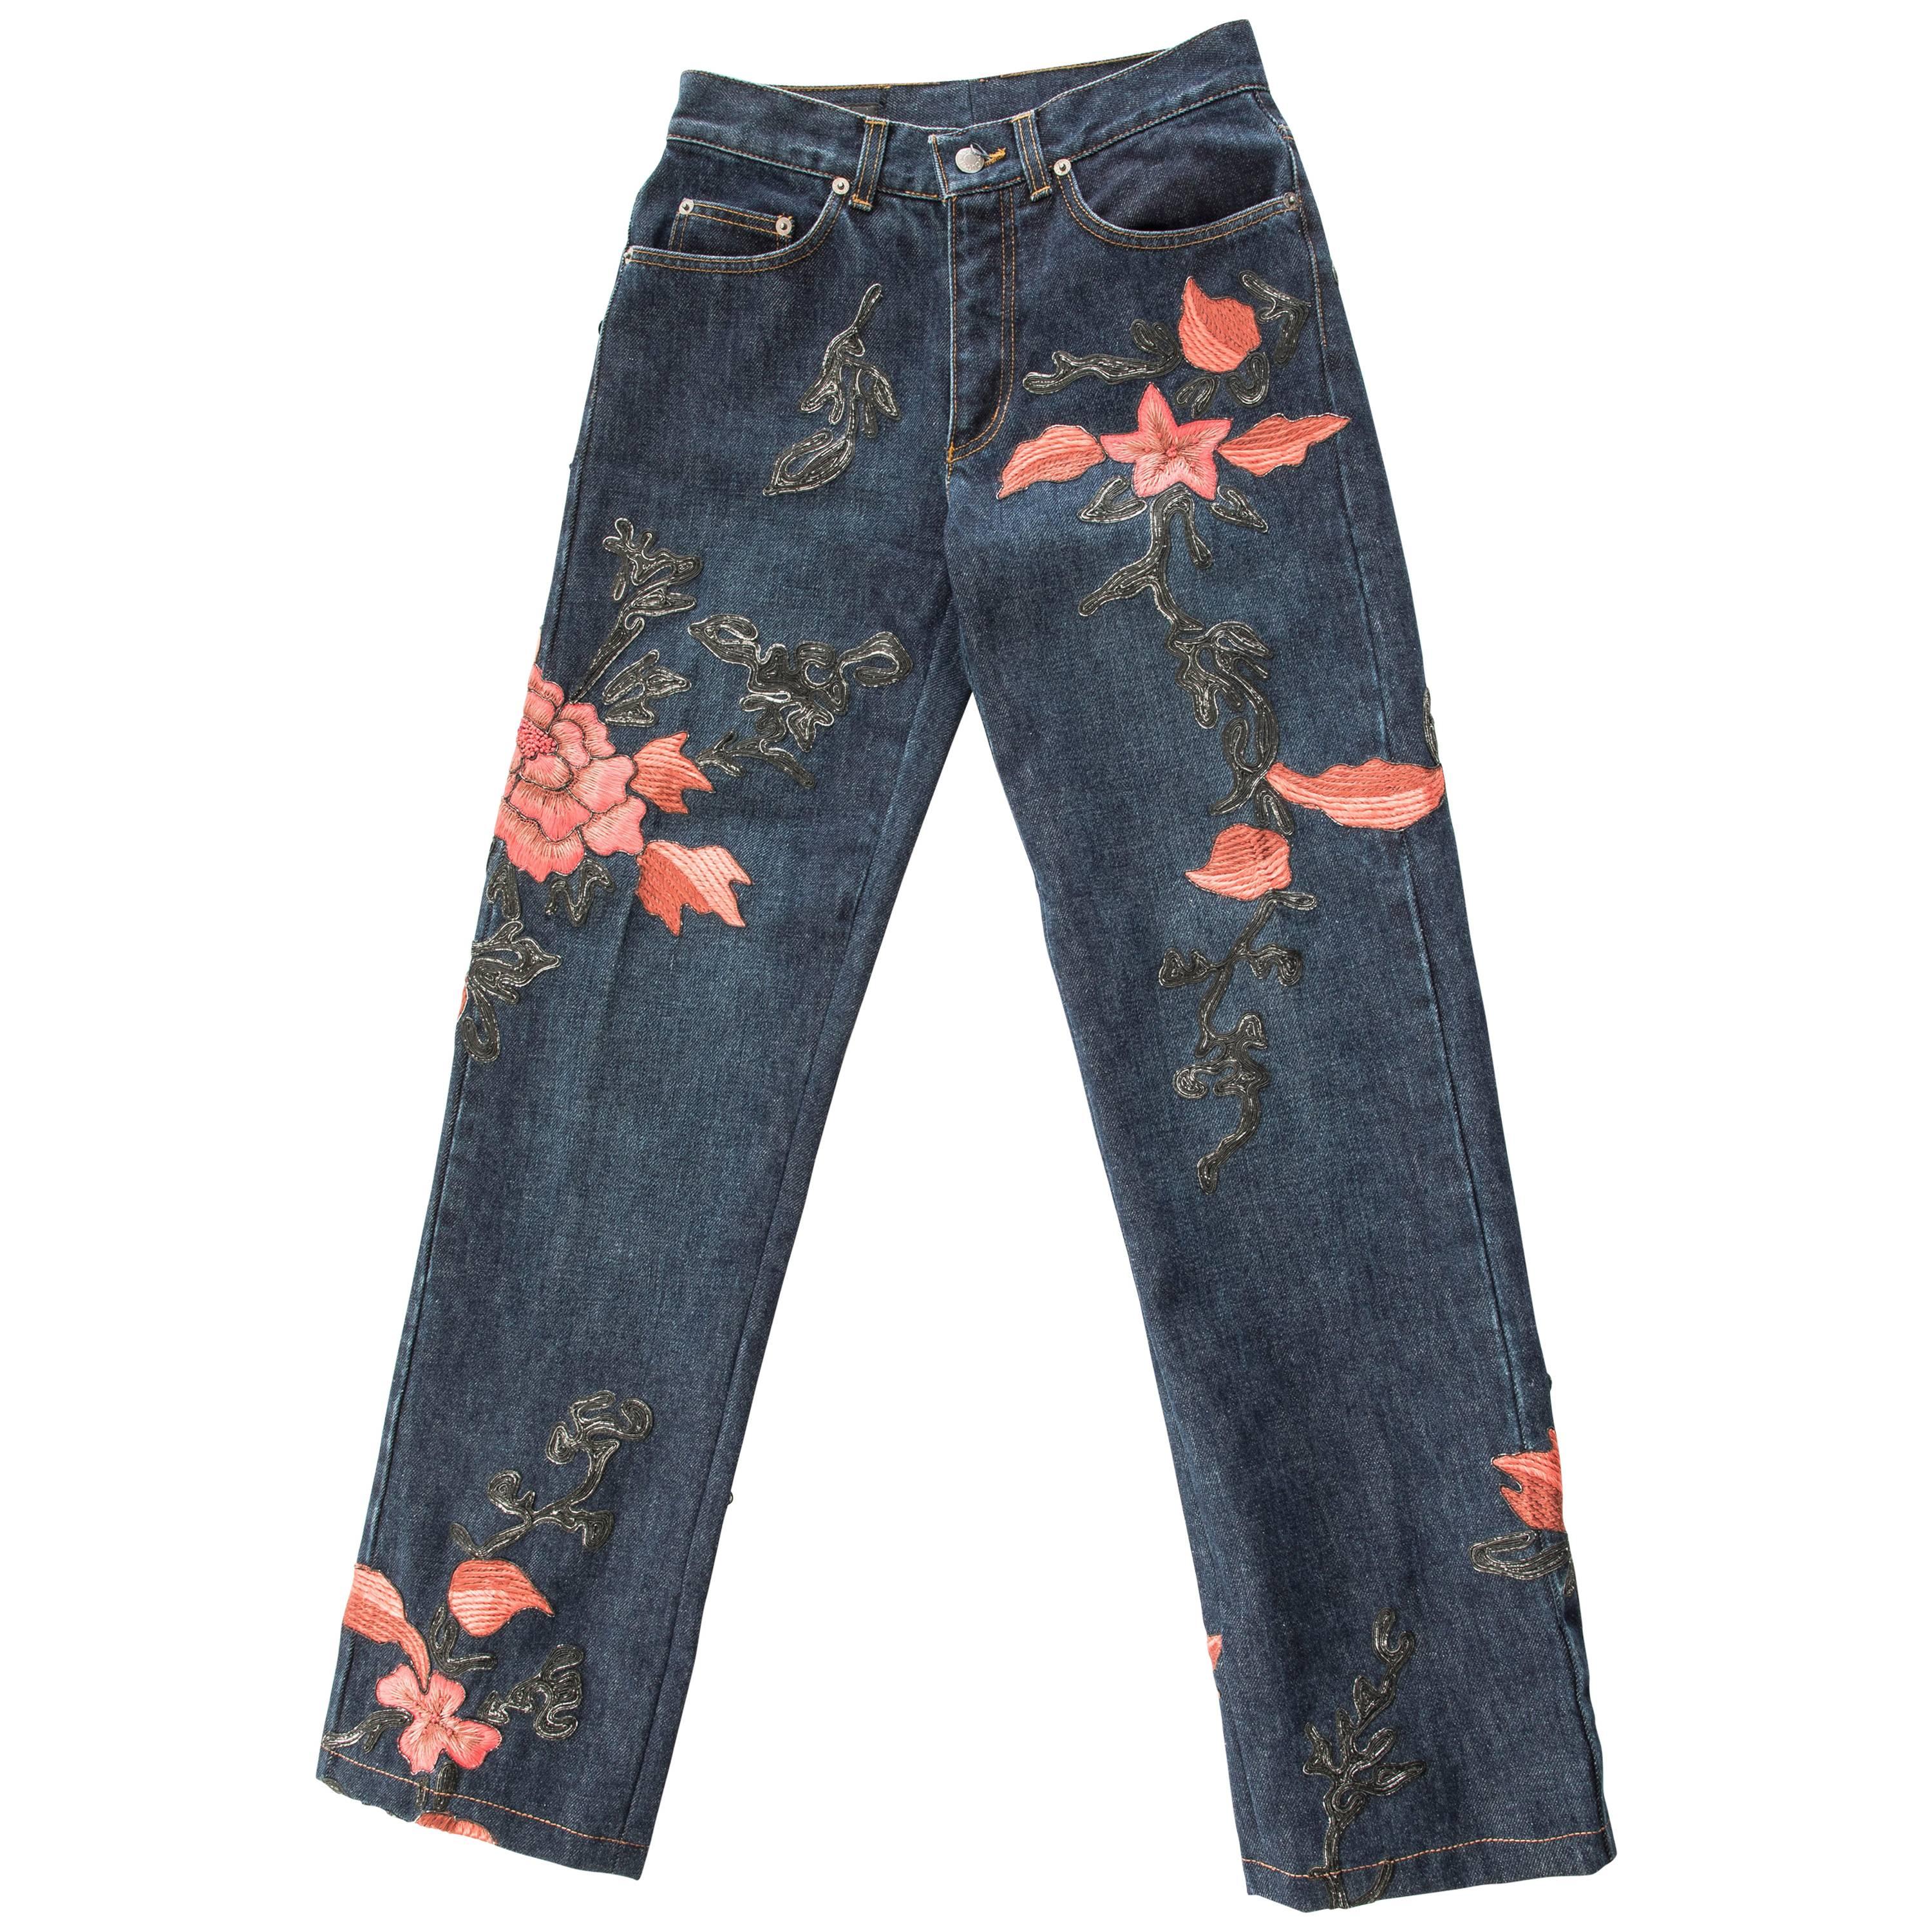 Tom Ford for Gucci Runway Men's Floral Embroidered Denim Jeans, Fall, 1999